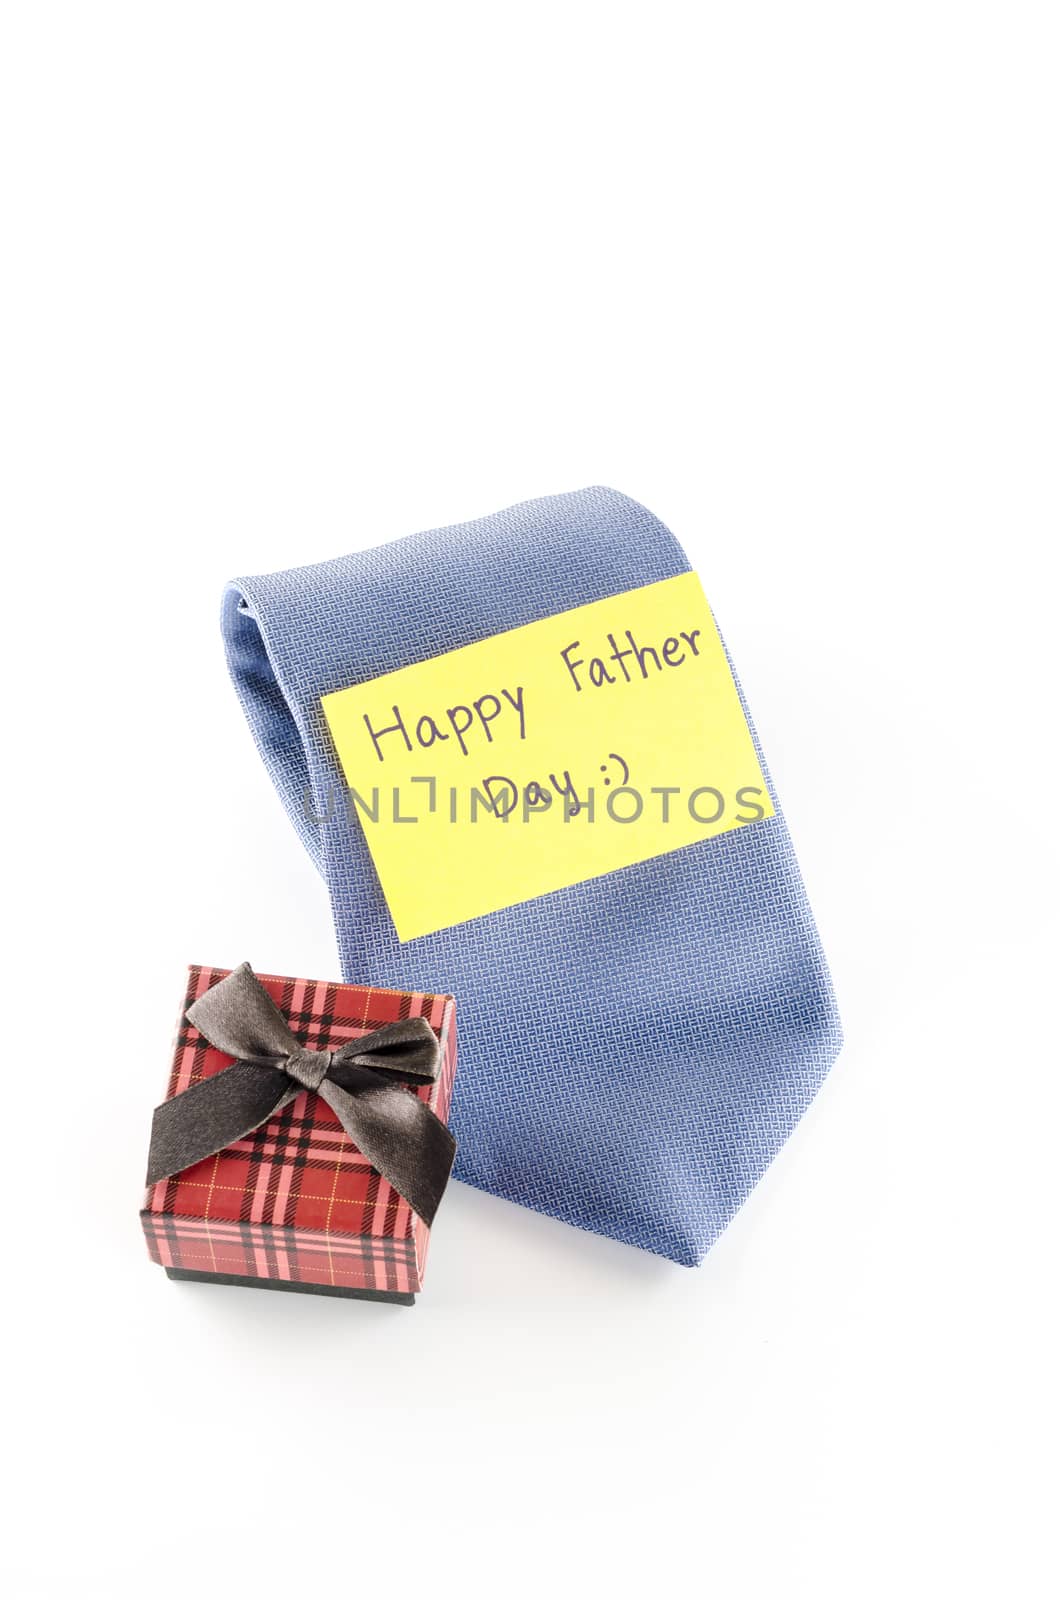 tie and gift box with card tag write happy father day word by ammza12